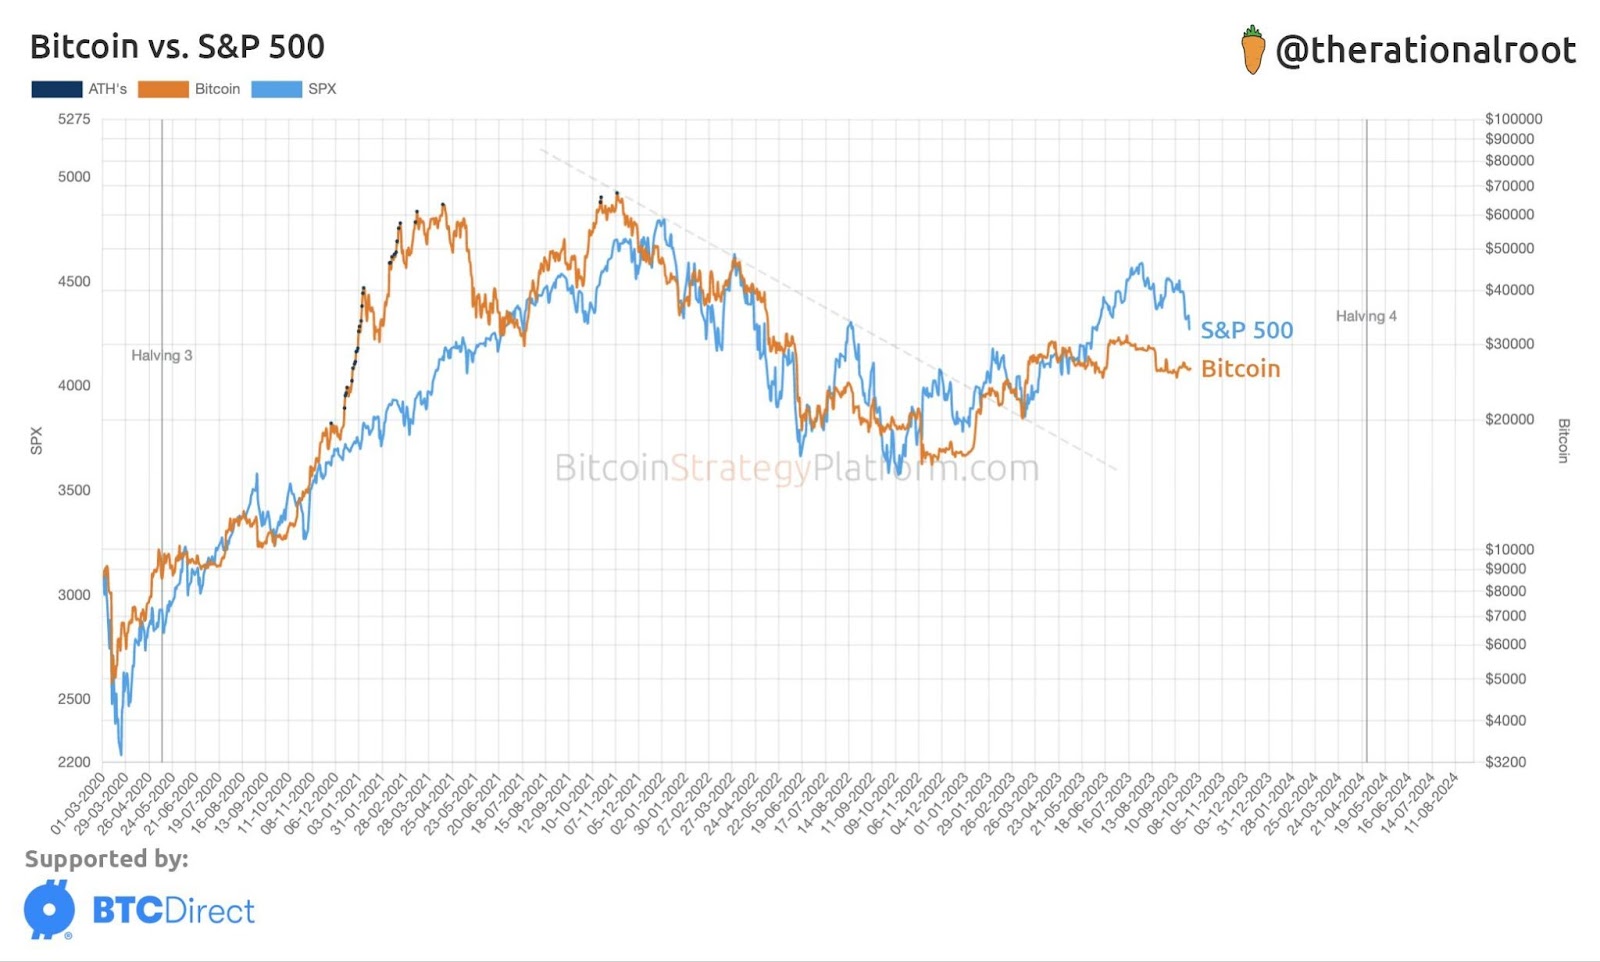 Bitcoin and S&P 500 charts from the beginning of 2020